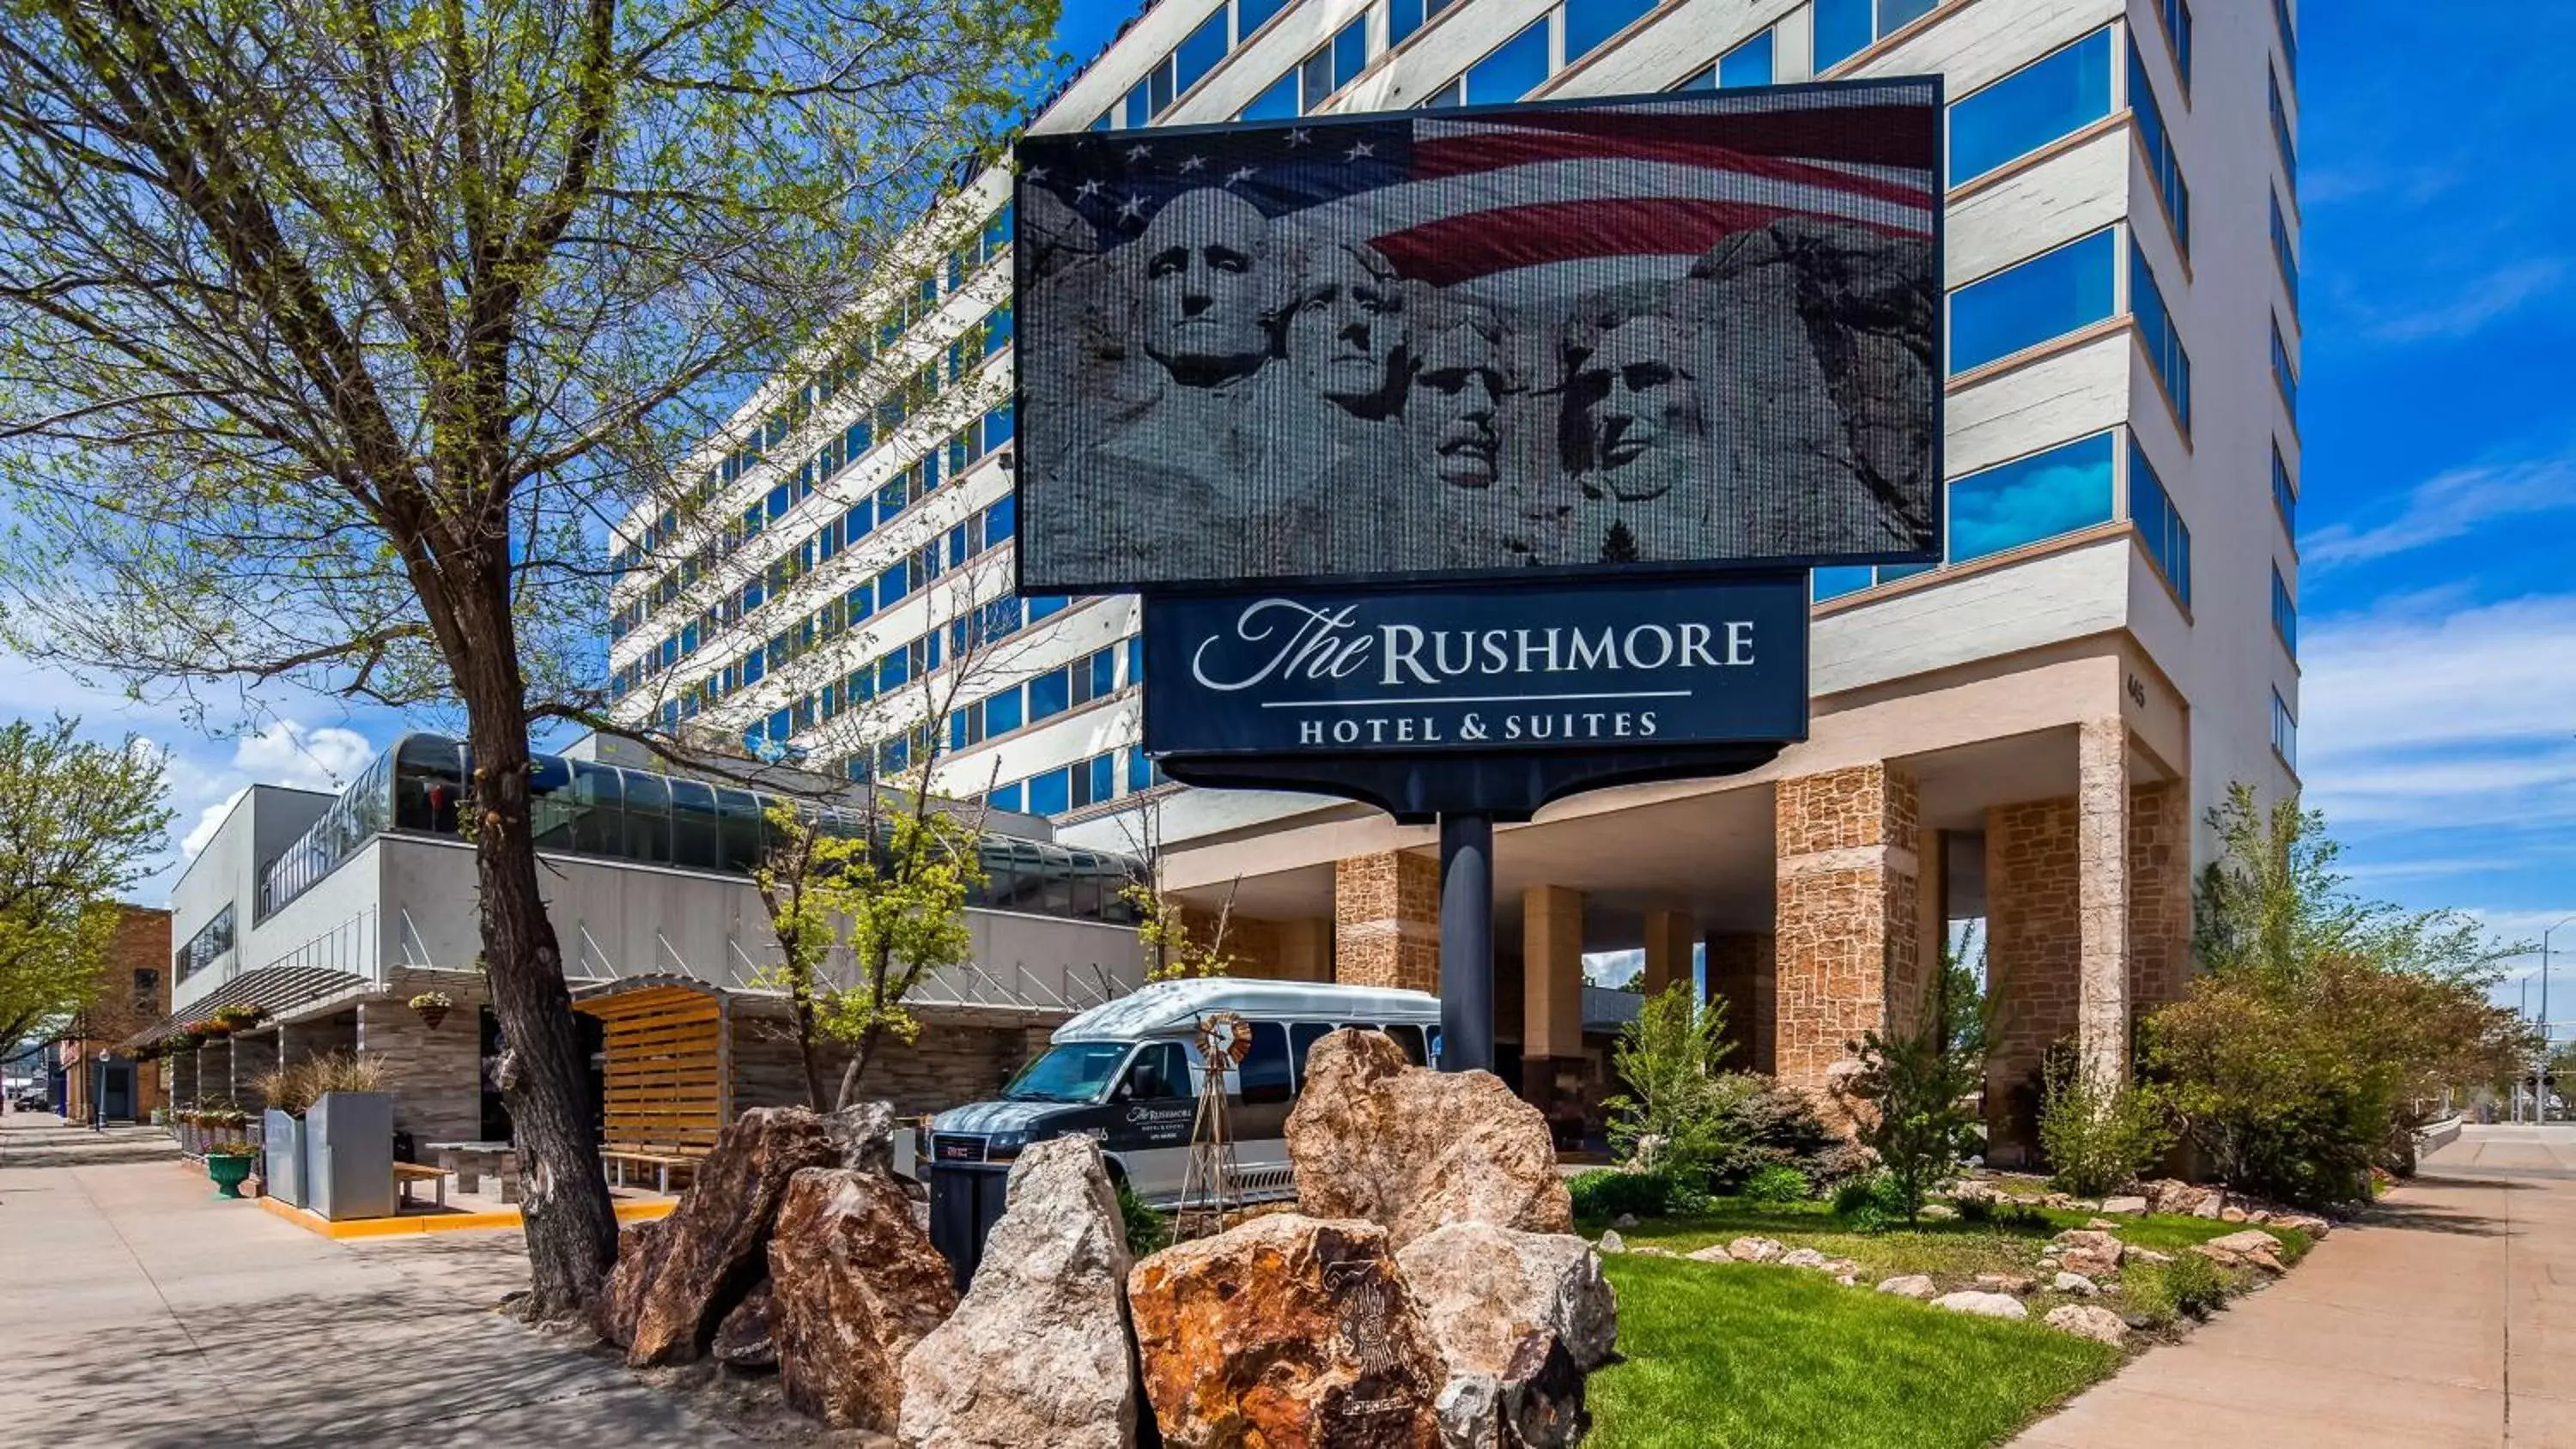 Property building in The Rushmore Hotel & Suites; BW Premier Collection